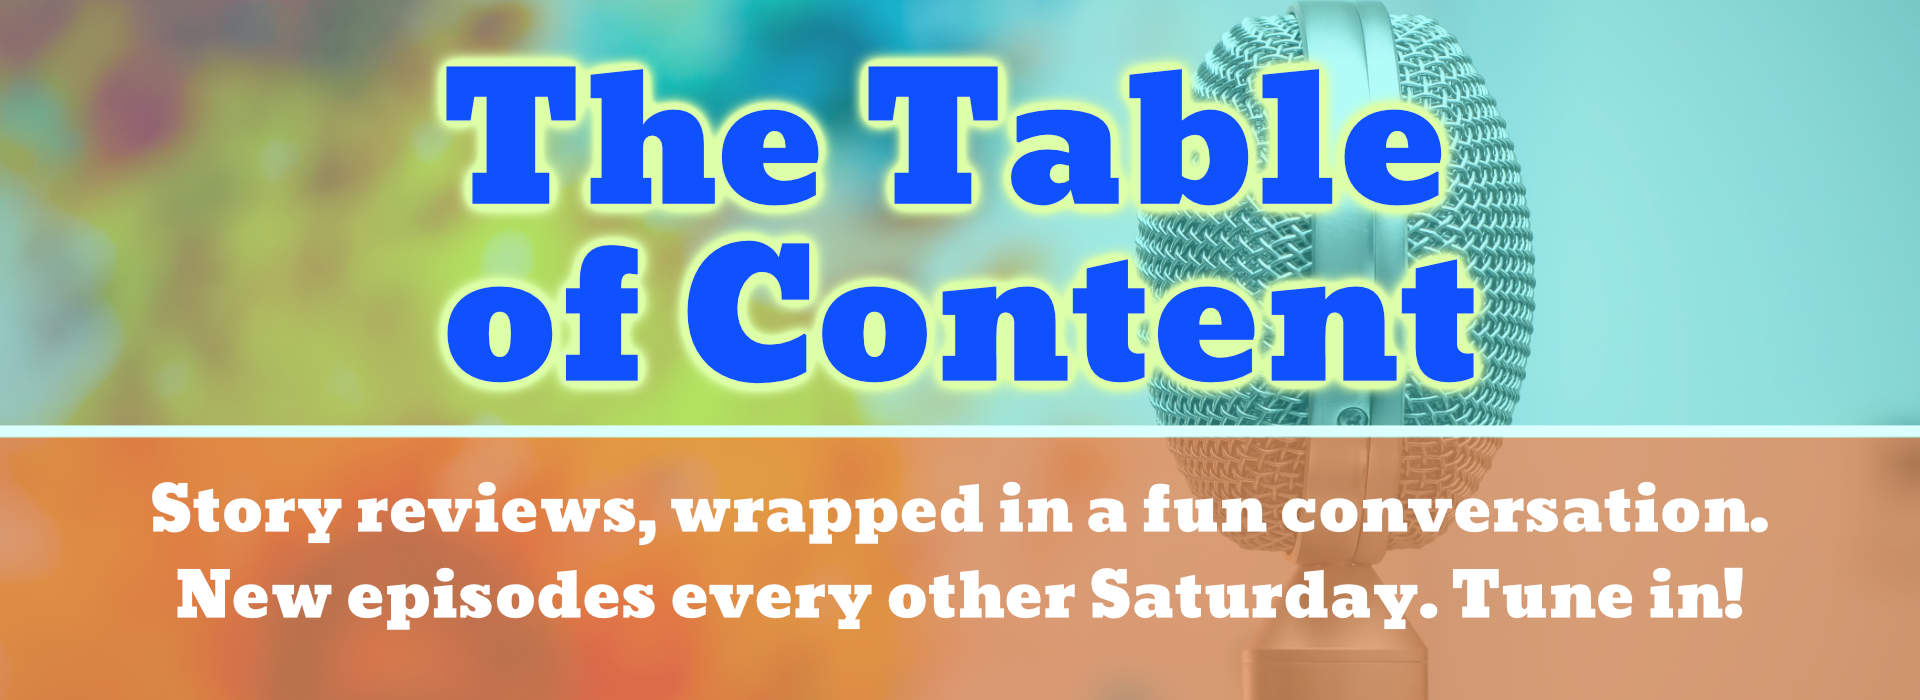 The Table of Content